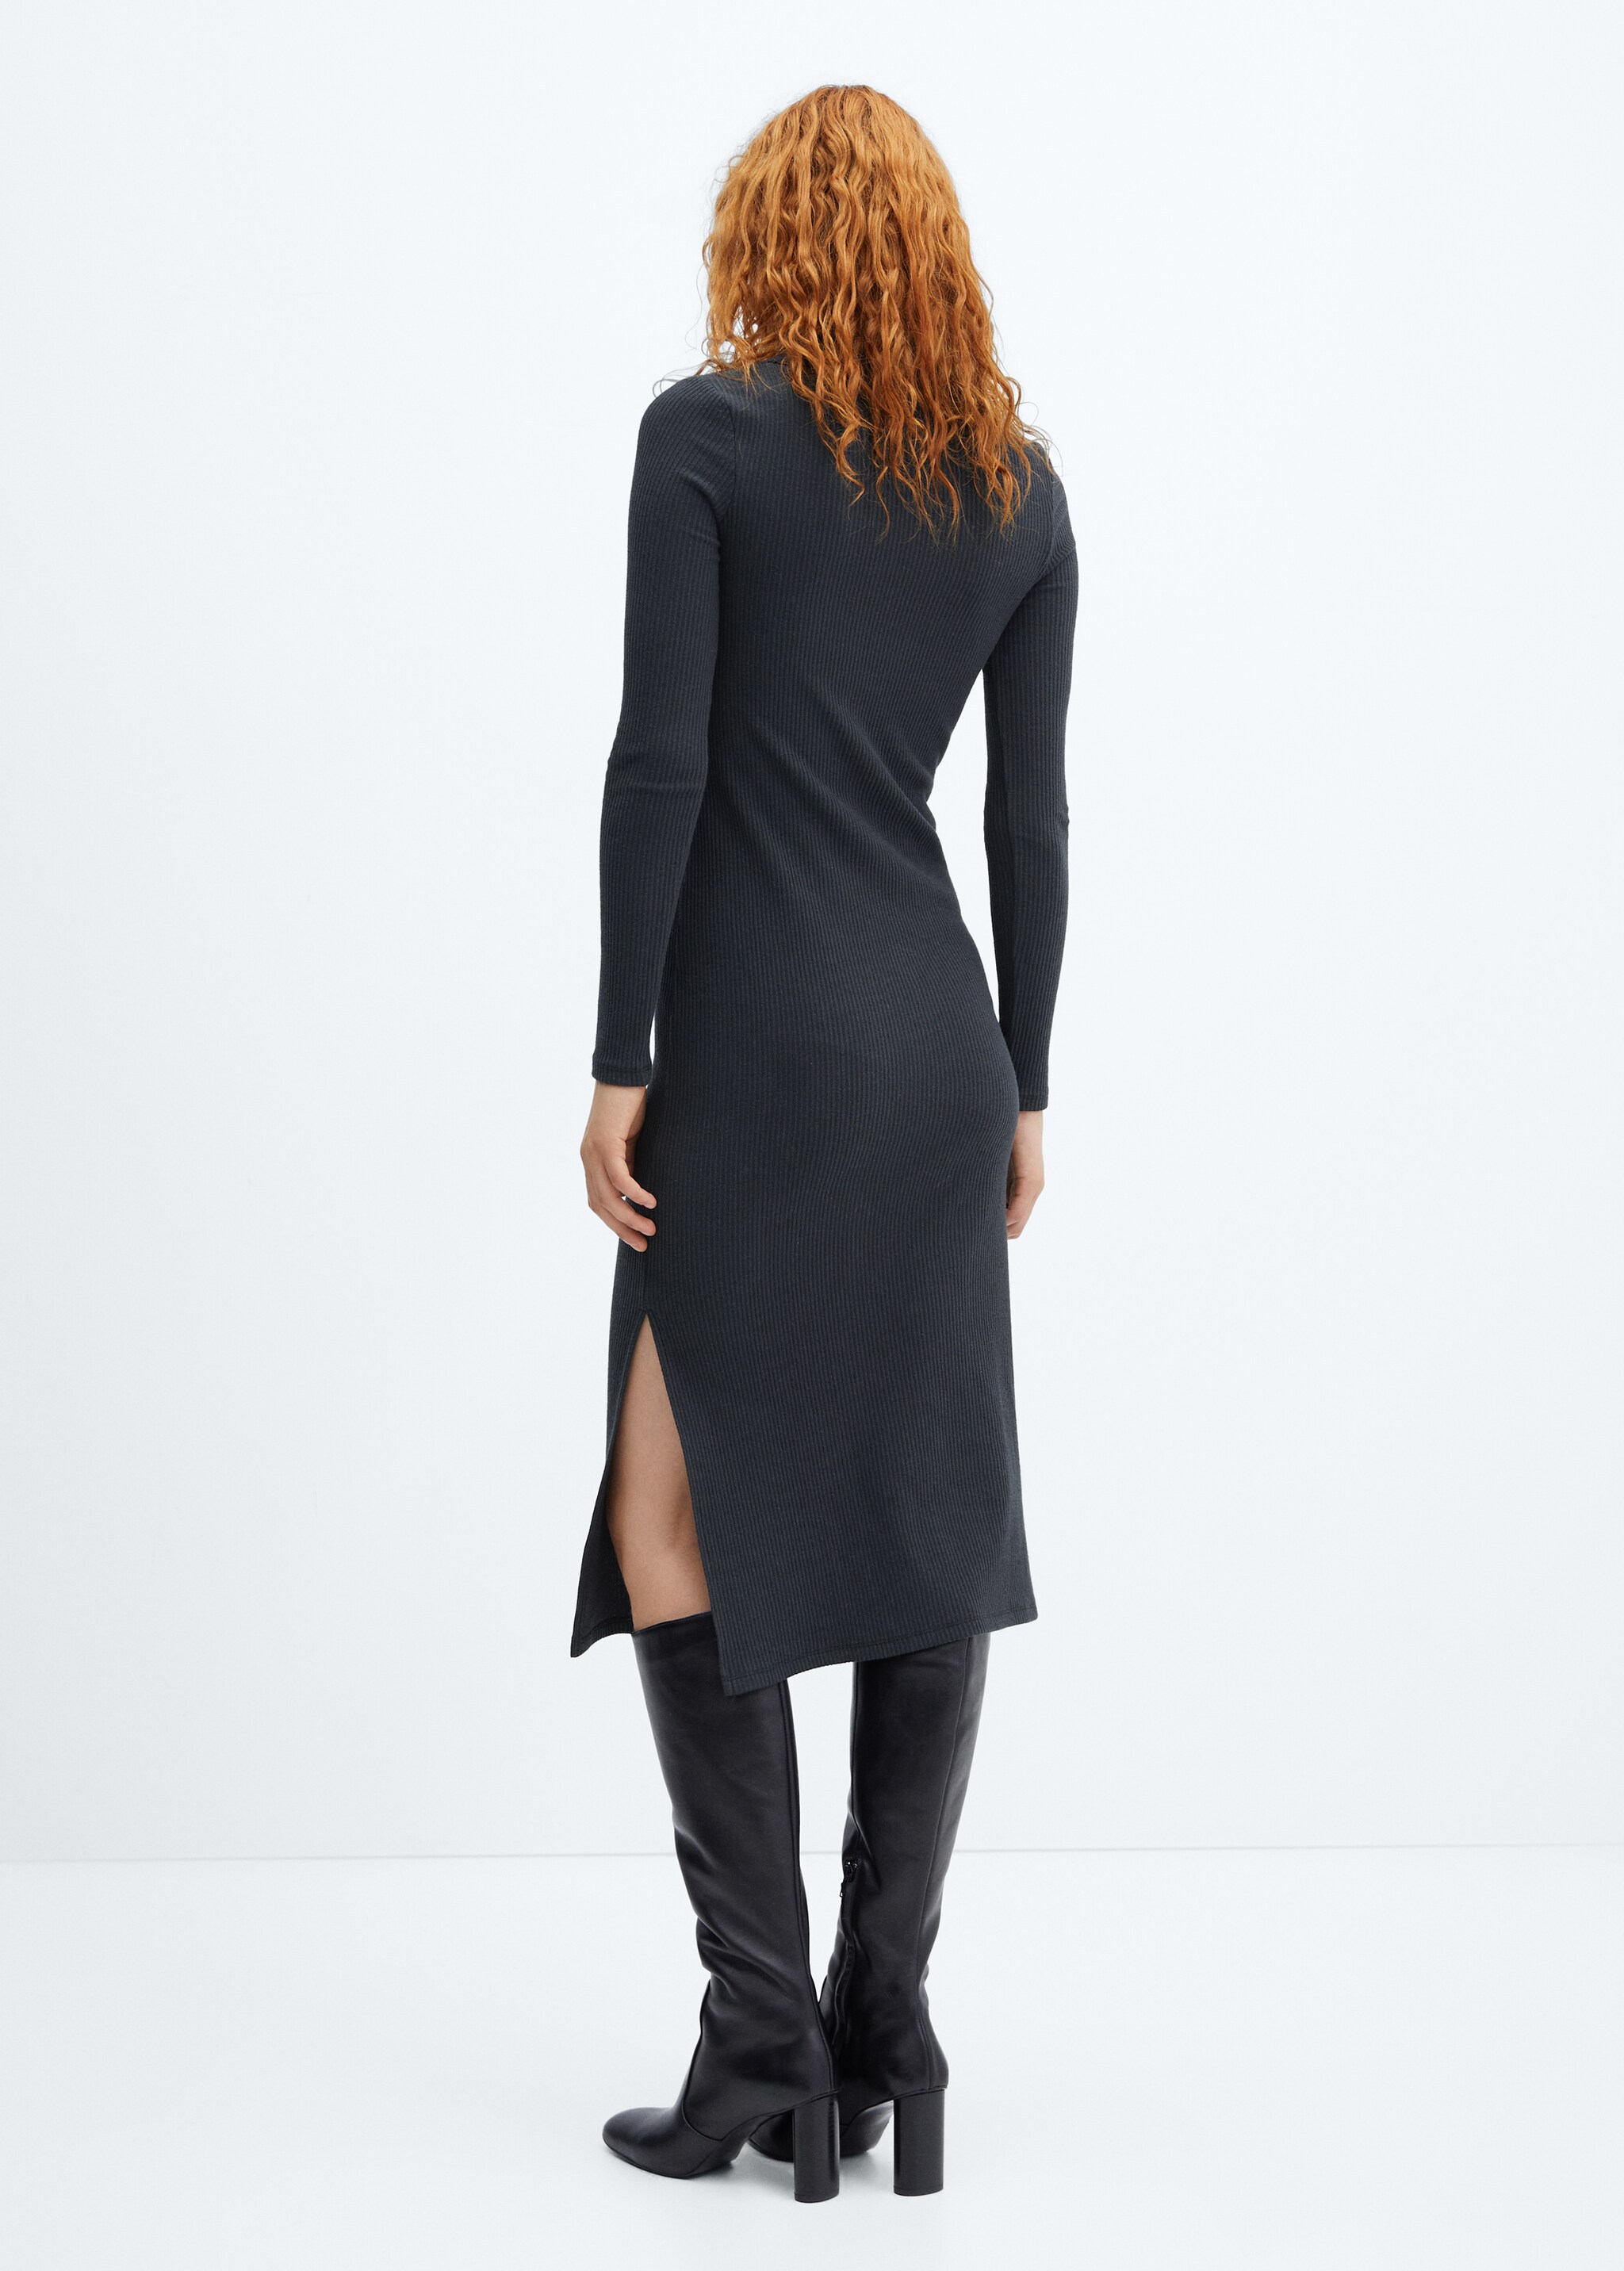 Zipped neckline dress - Reverse of the article